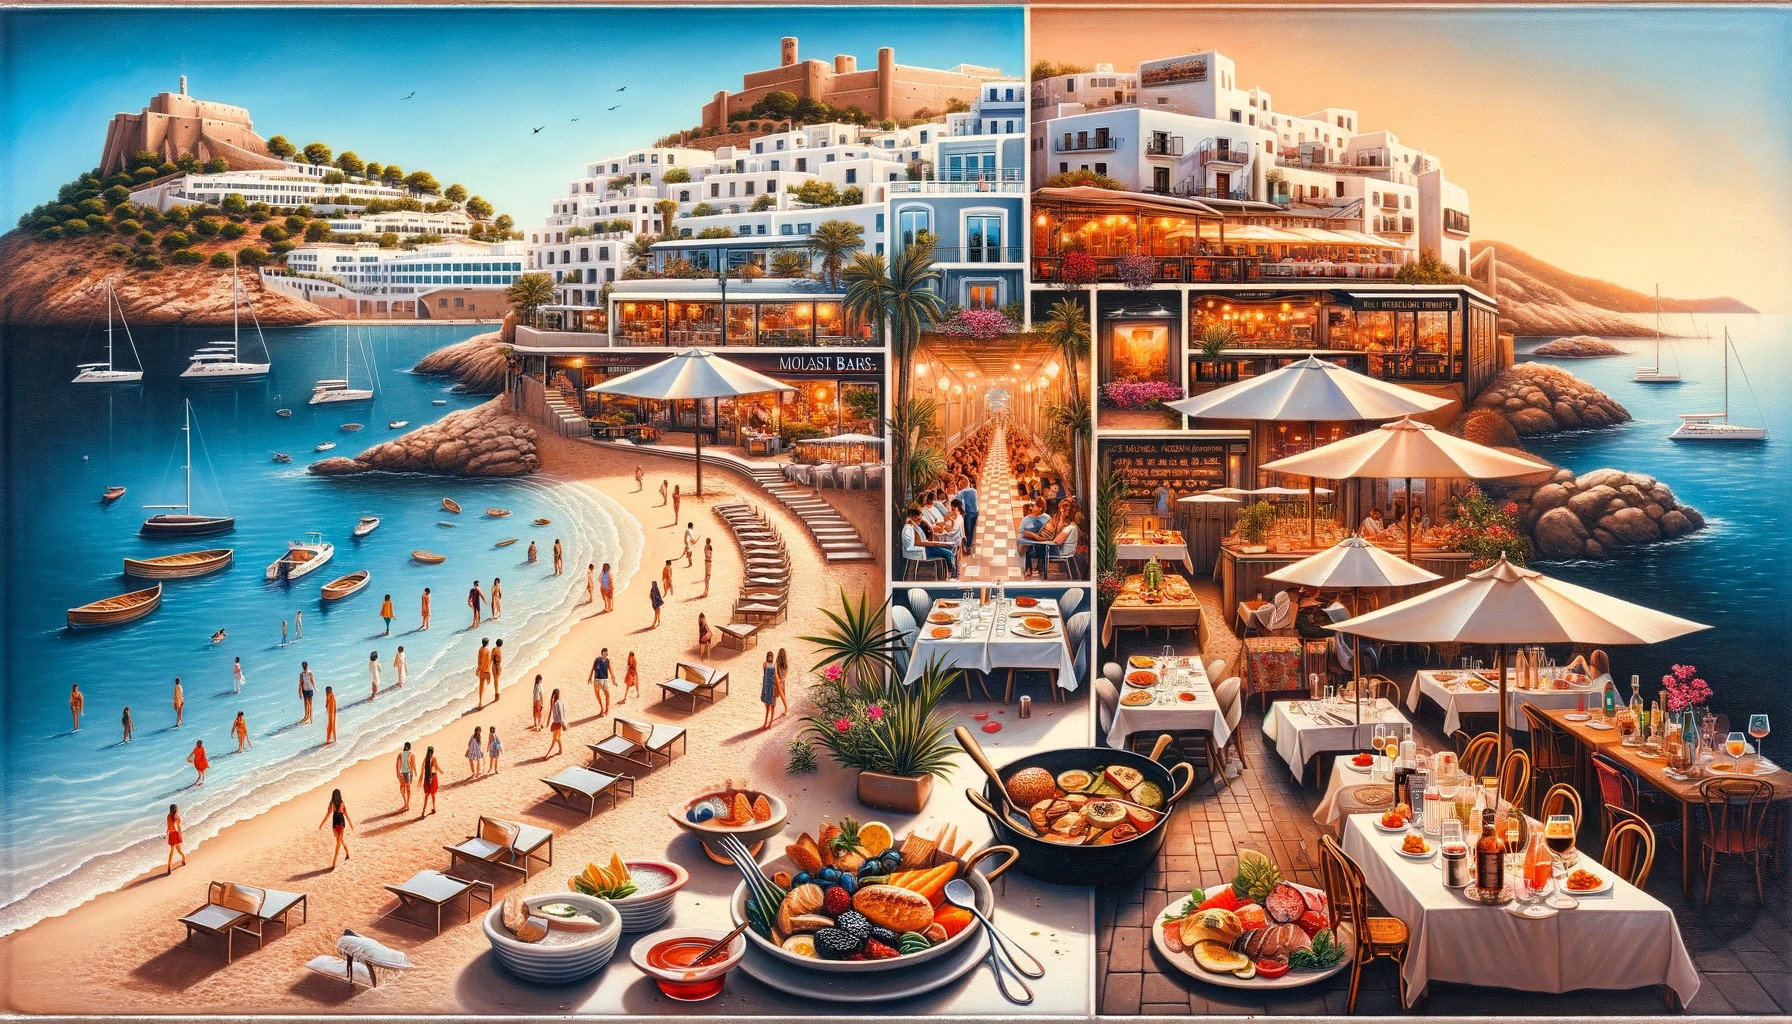 You are currently viewing Cost of Food and Drink in Ibiza: A Balancing Act